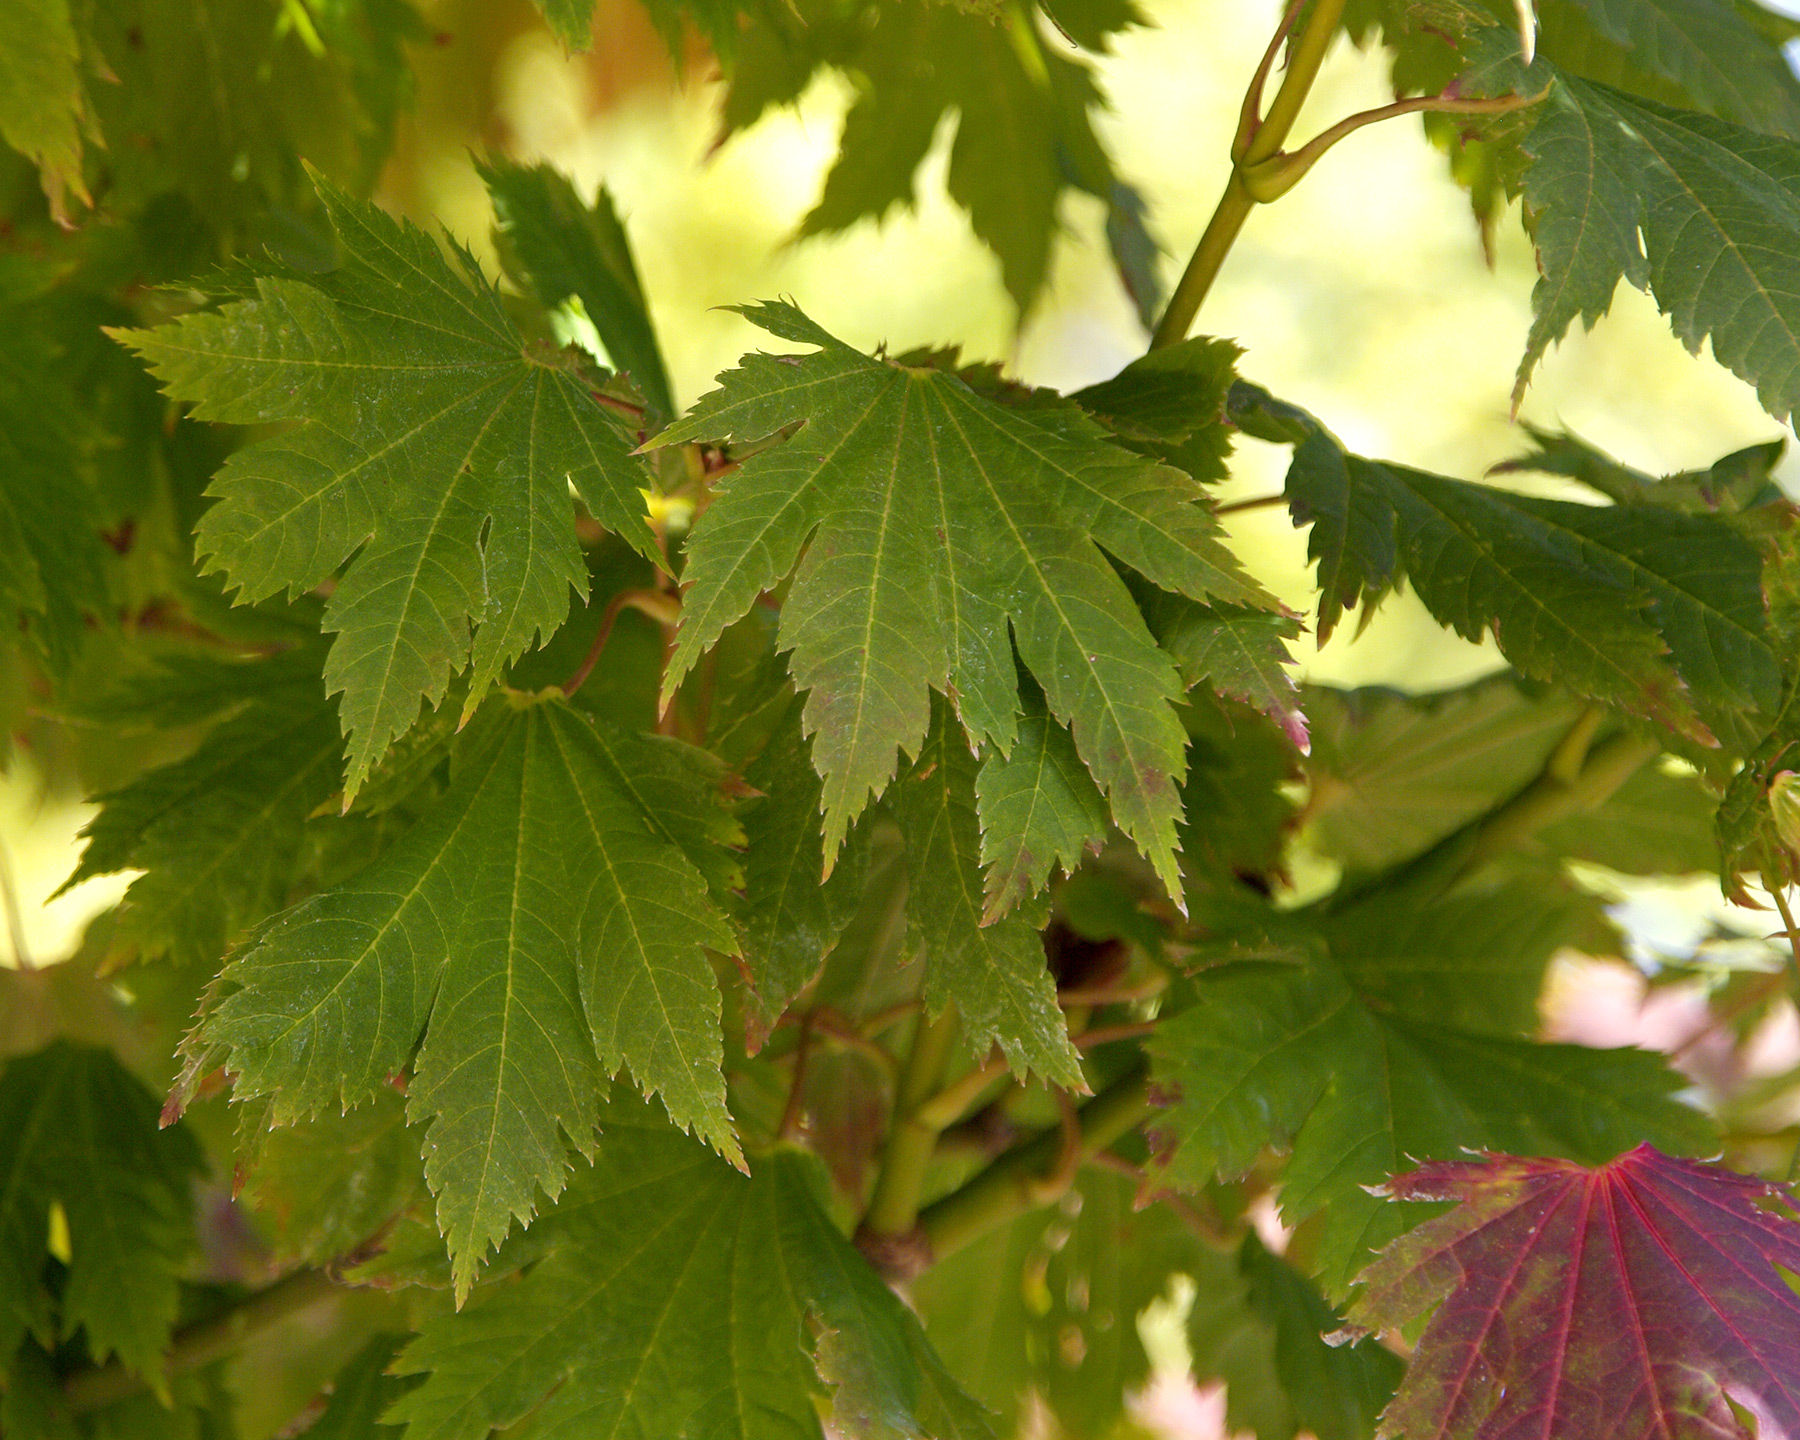 Acer japonicum - the leaves darken before turning red and orange